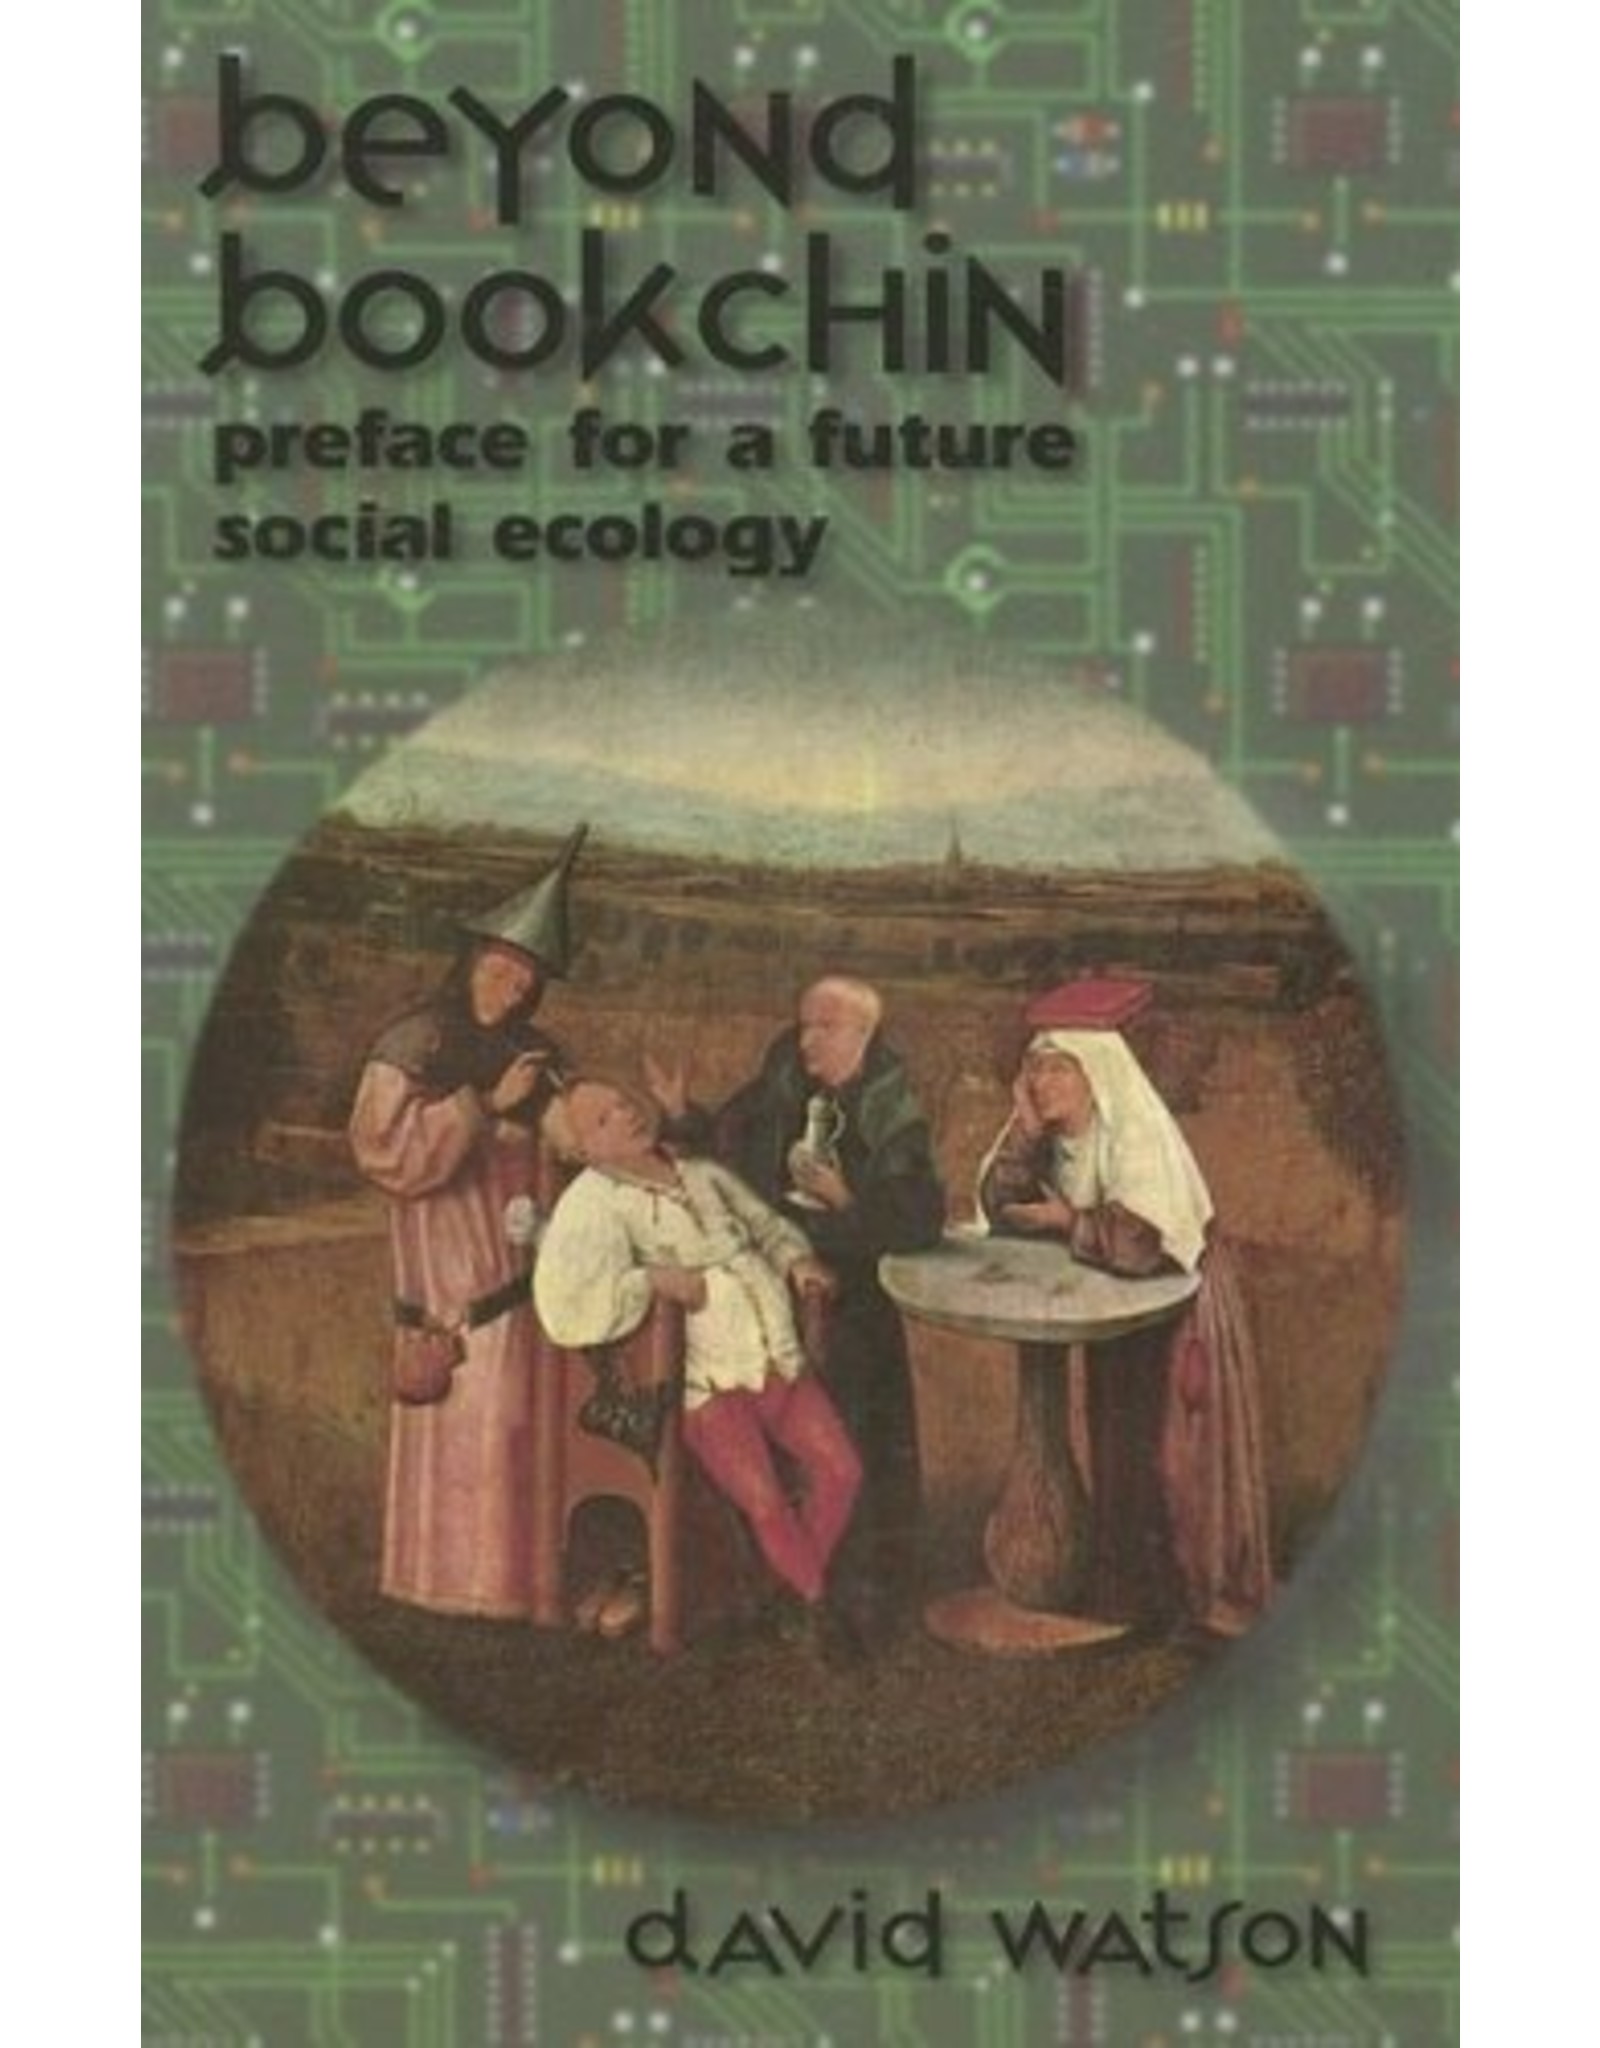 Literature Beyond Bookchin: Preface for a Future Social Ecology